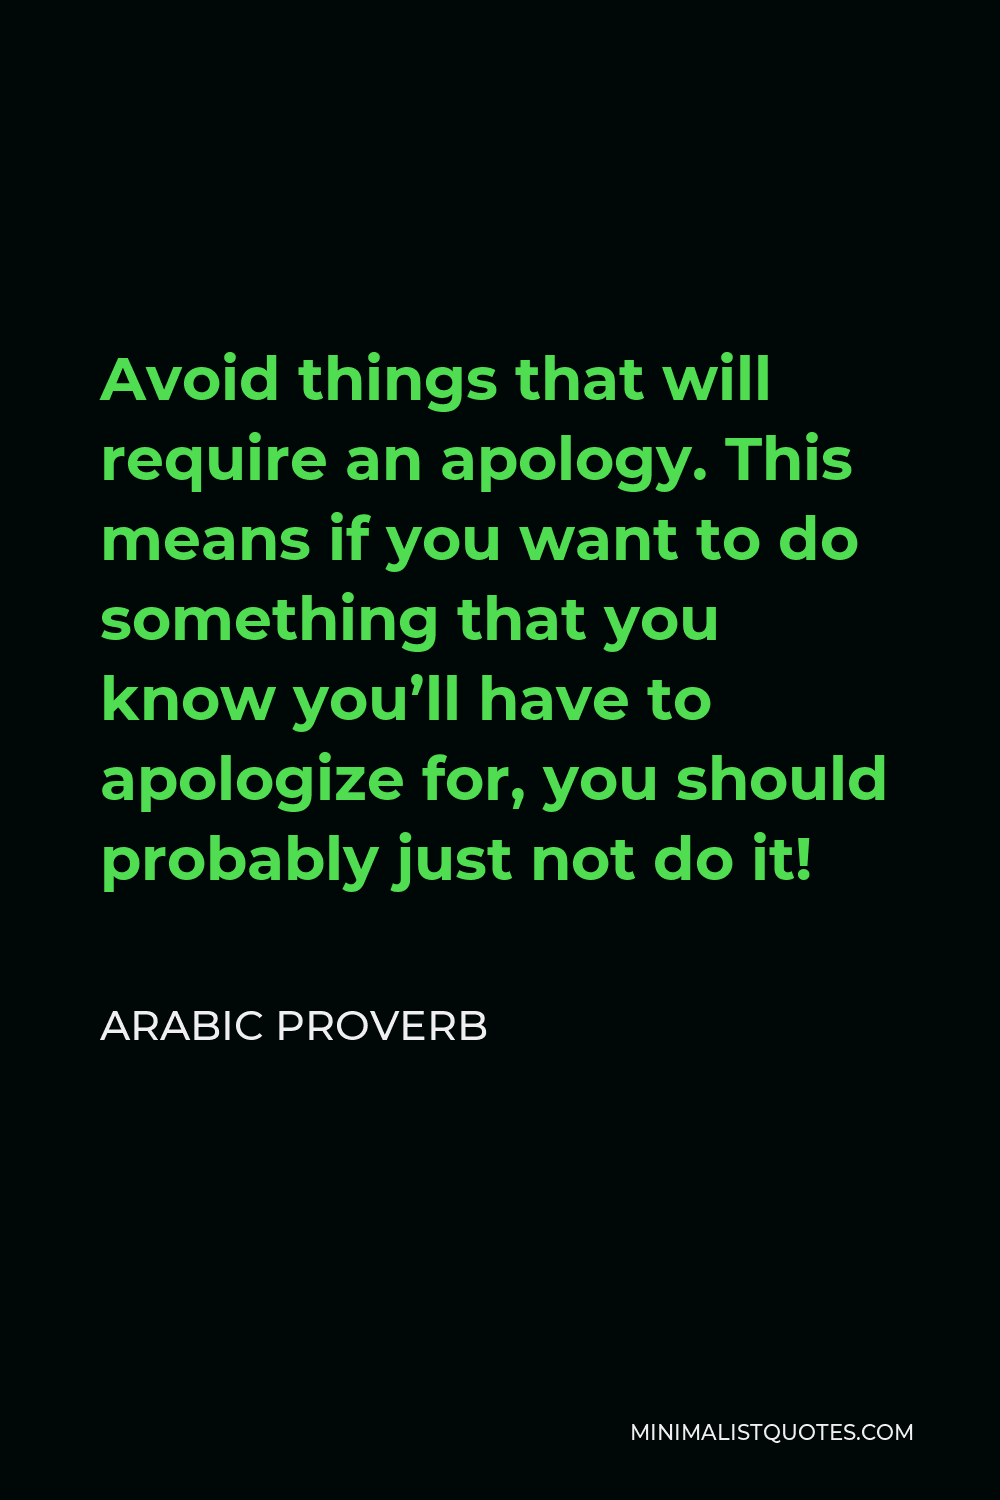 Arabic Proverb Quote - Avoid things that will require an apology. This means if you want to do something that you know you’ll have to apologize for, you should probably just not do it!